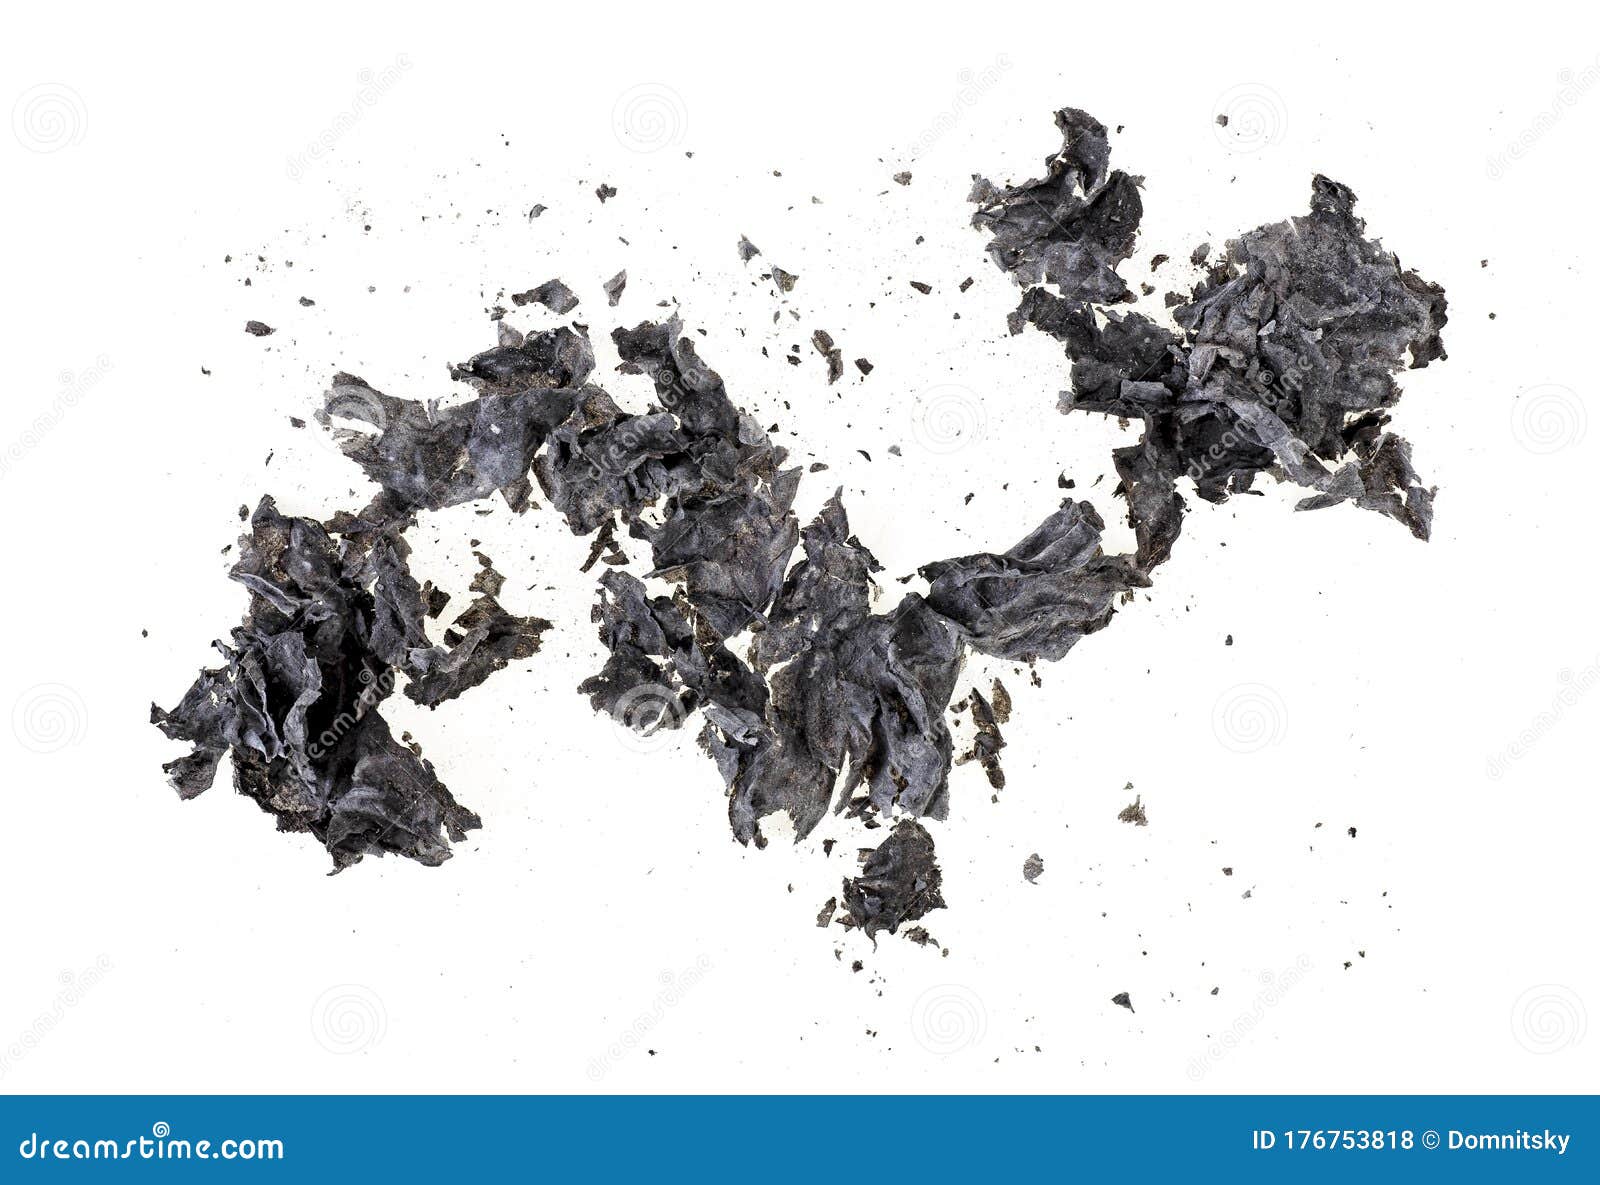 burned paper on white background, top view